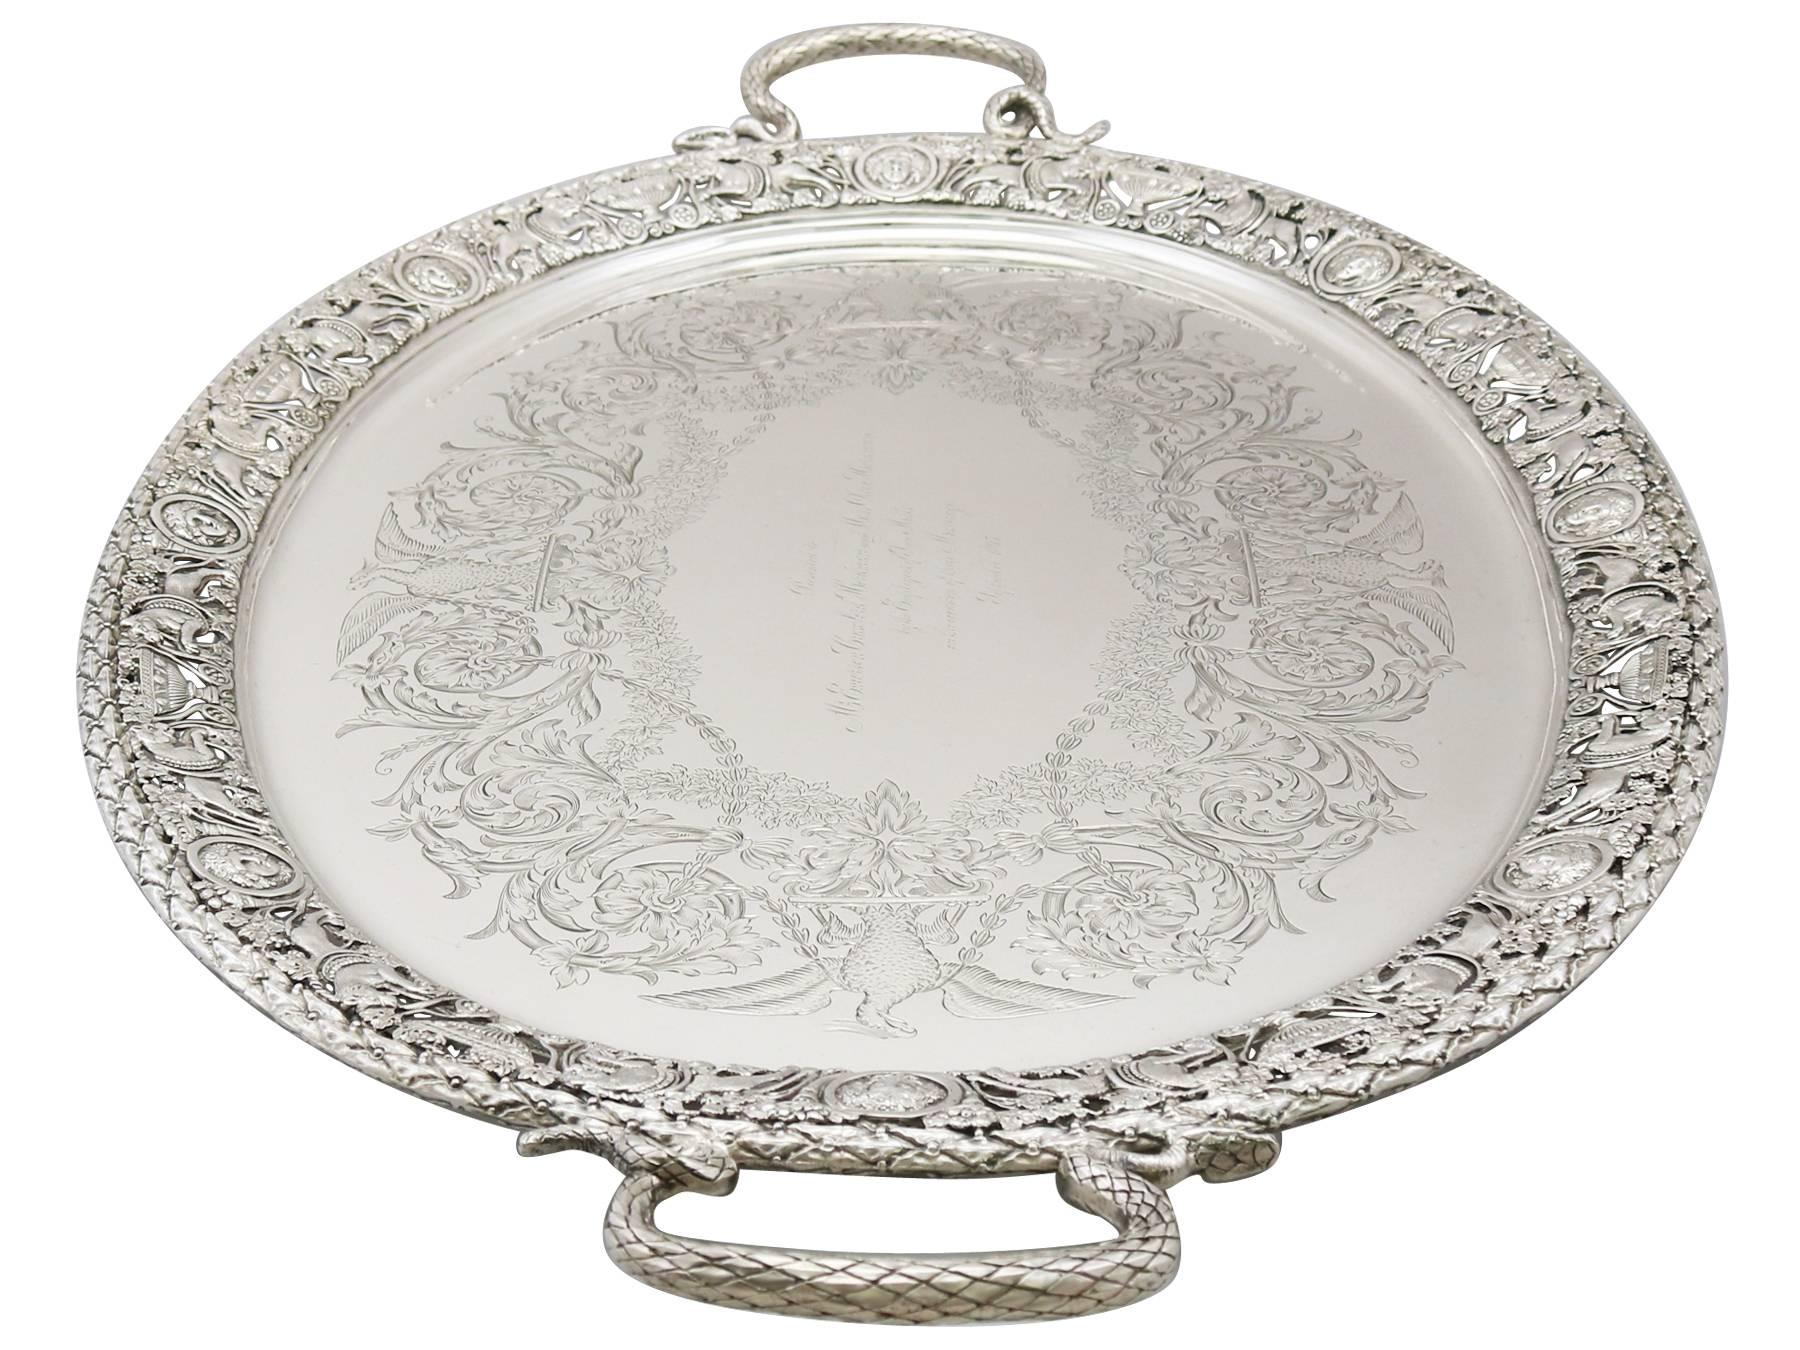 British Antique Victorian 1894 Sterling Silver Tea Tray by Mappin & Webb Ltd